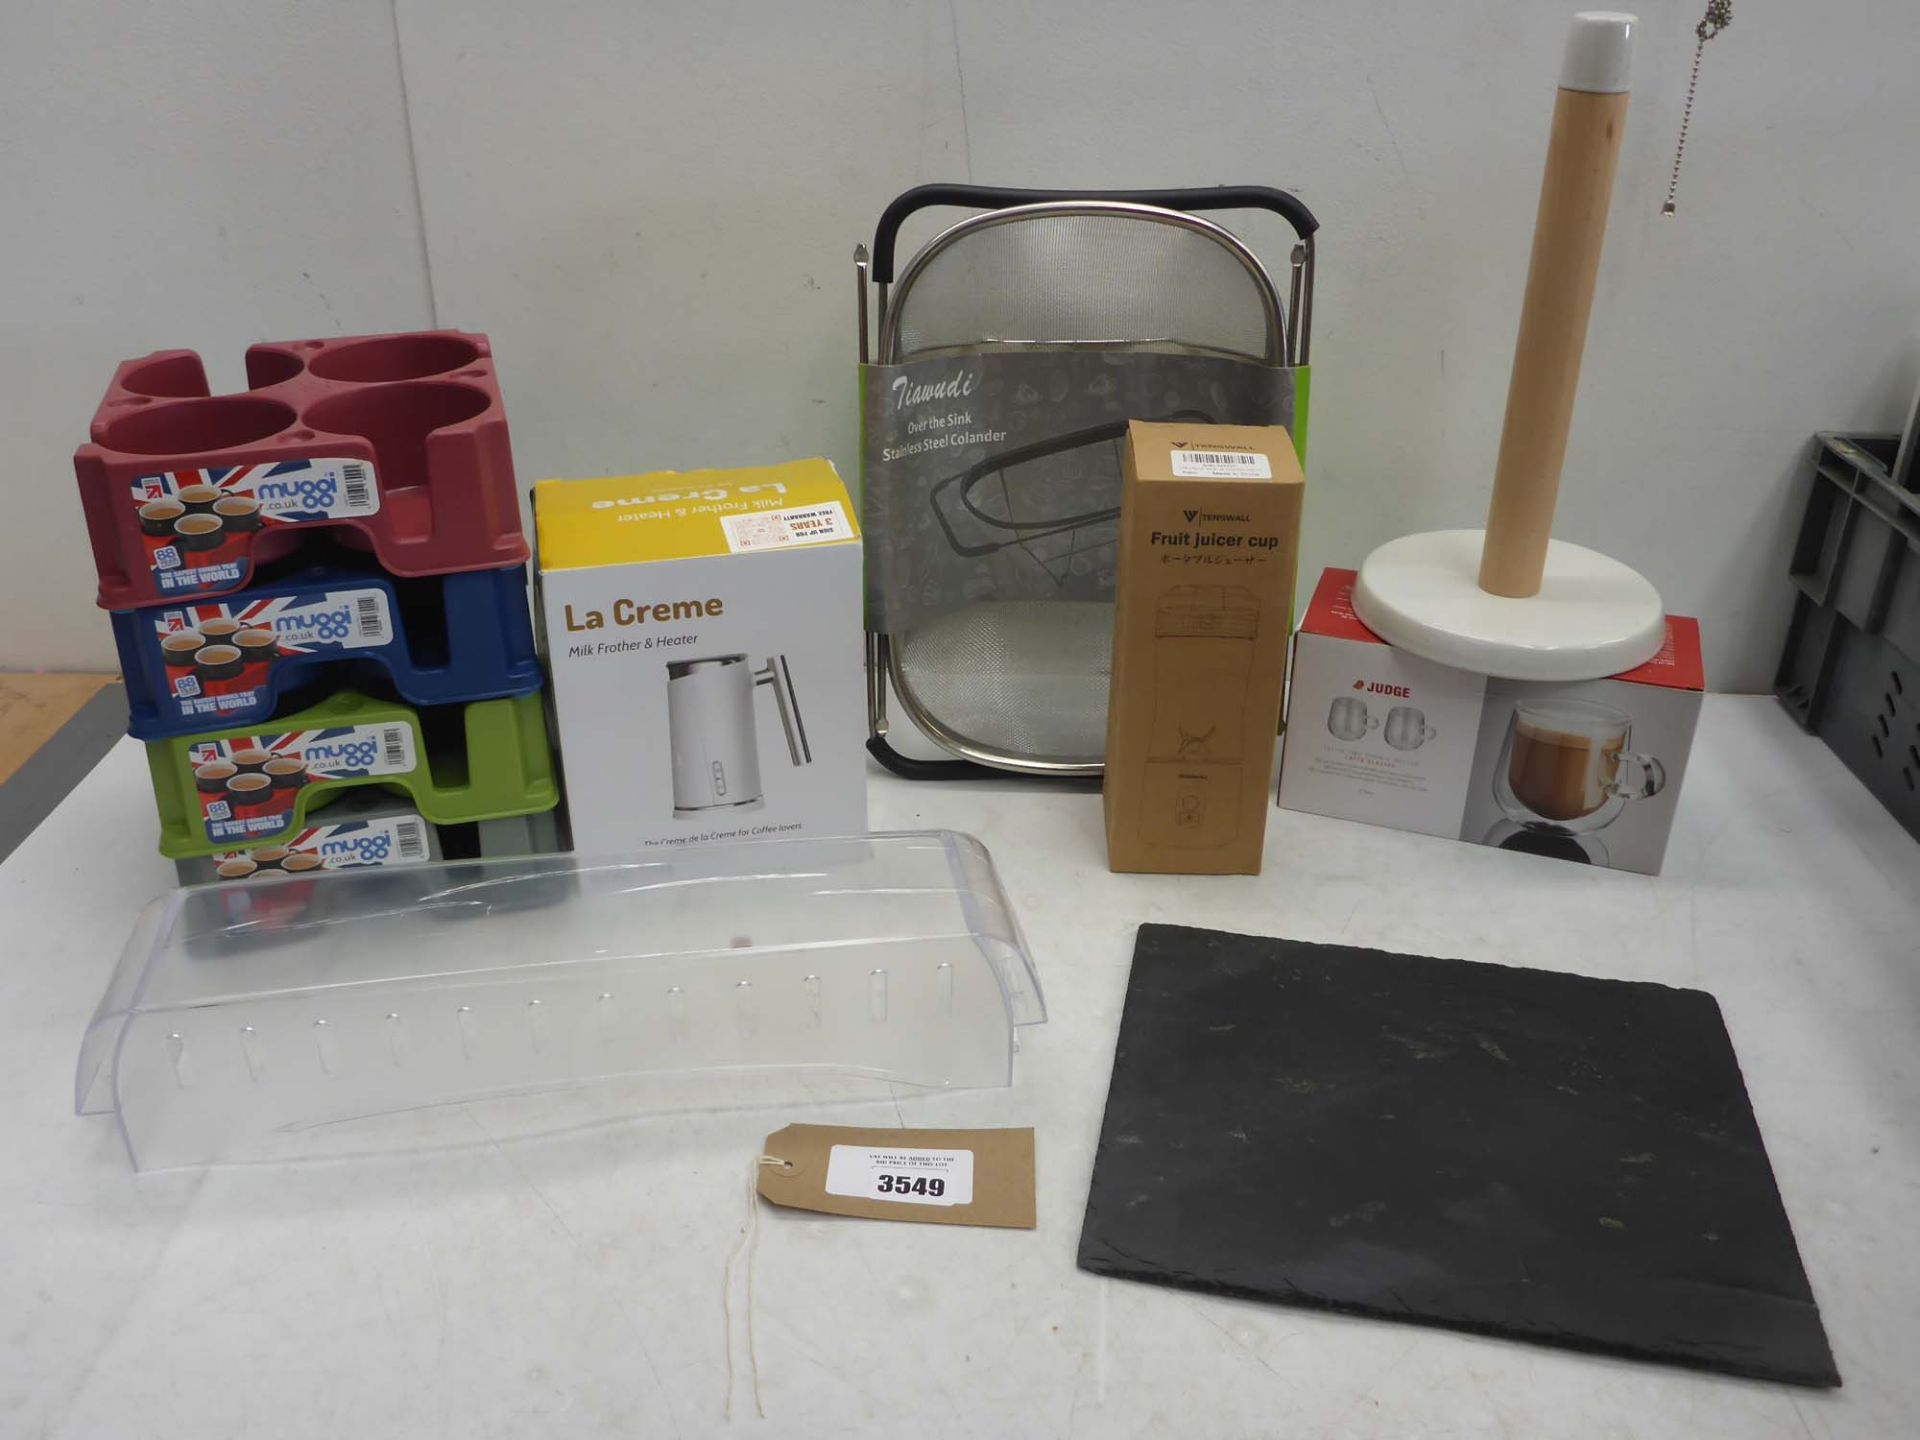 La Creme milk frother & heater, Over the sink colander, paper towel holder, Judge double walled